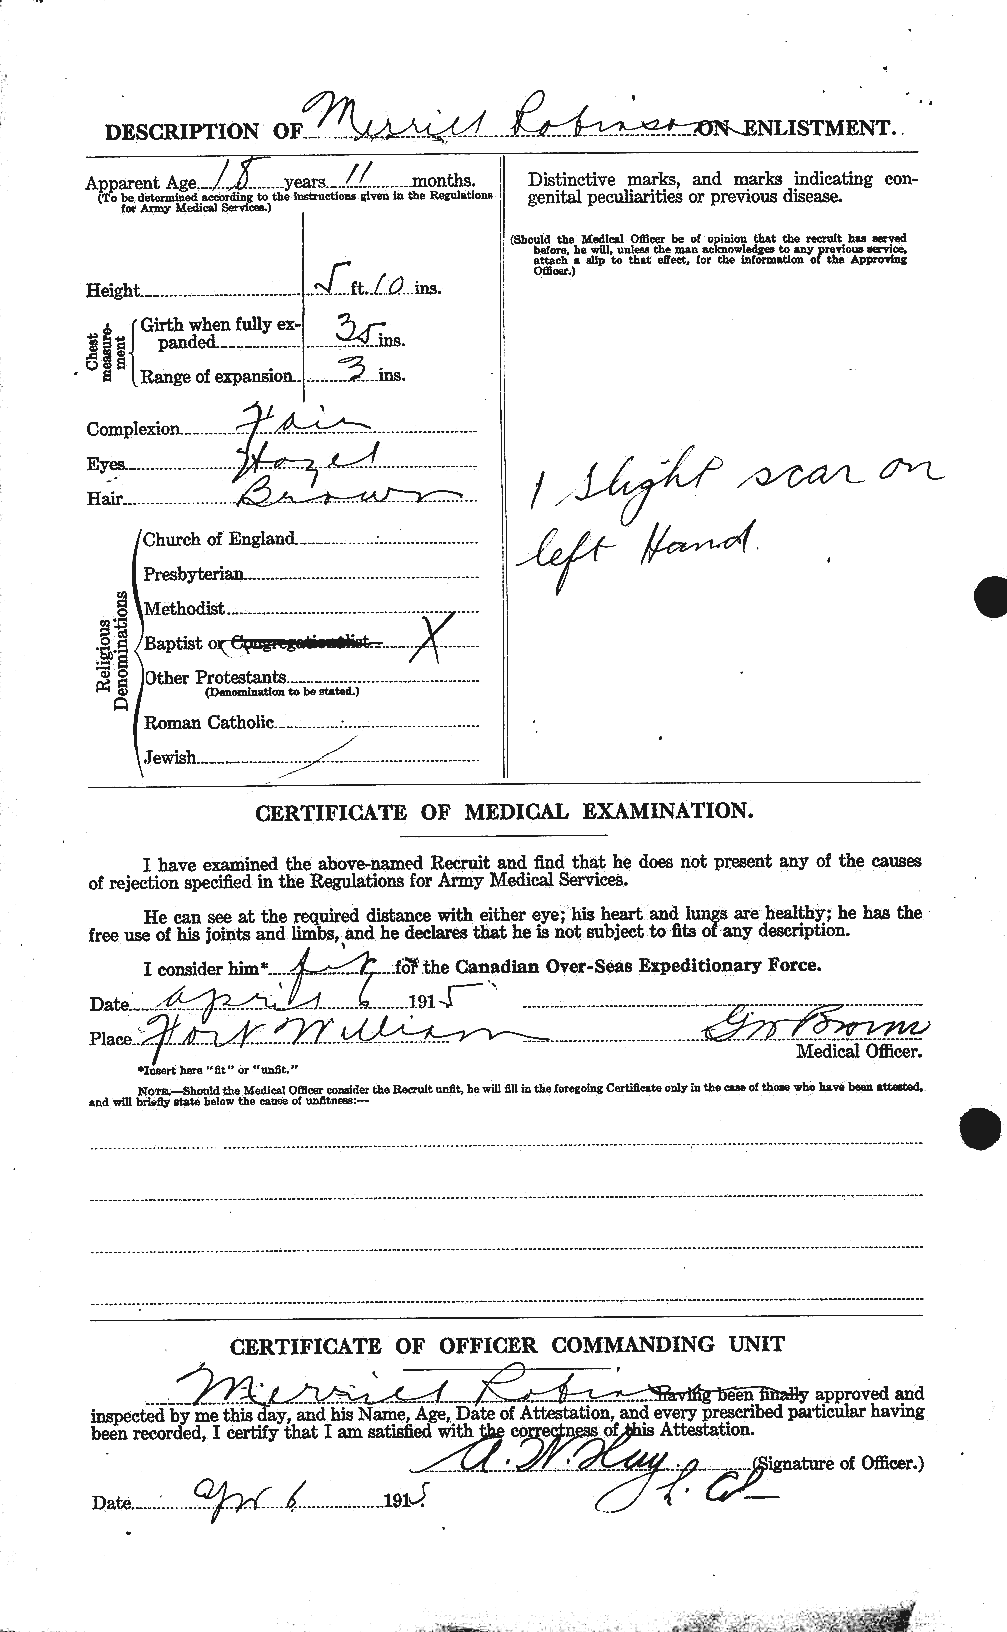 Personnel Records of the First World War - CEF 611676b